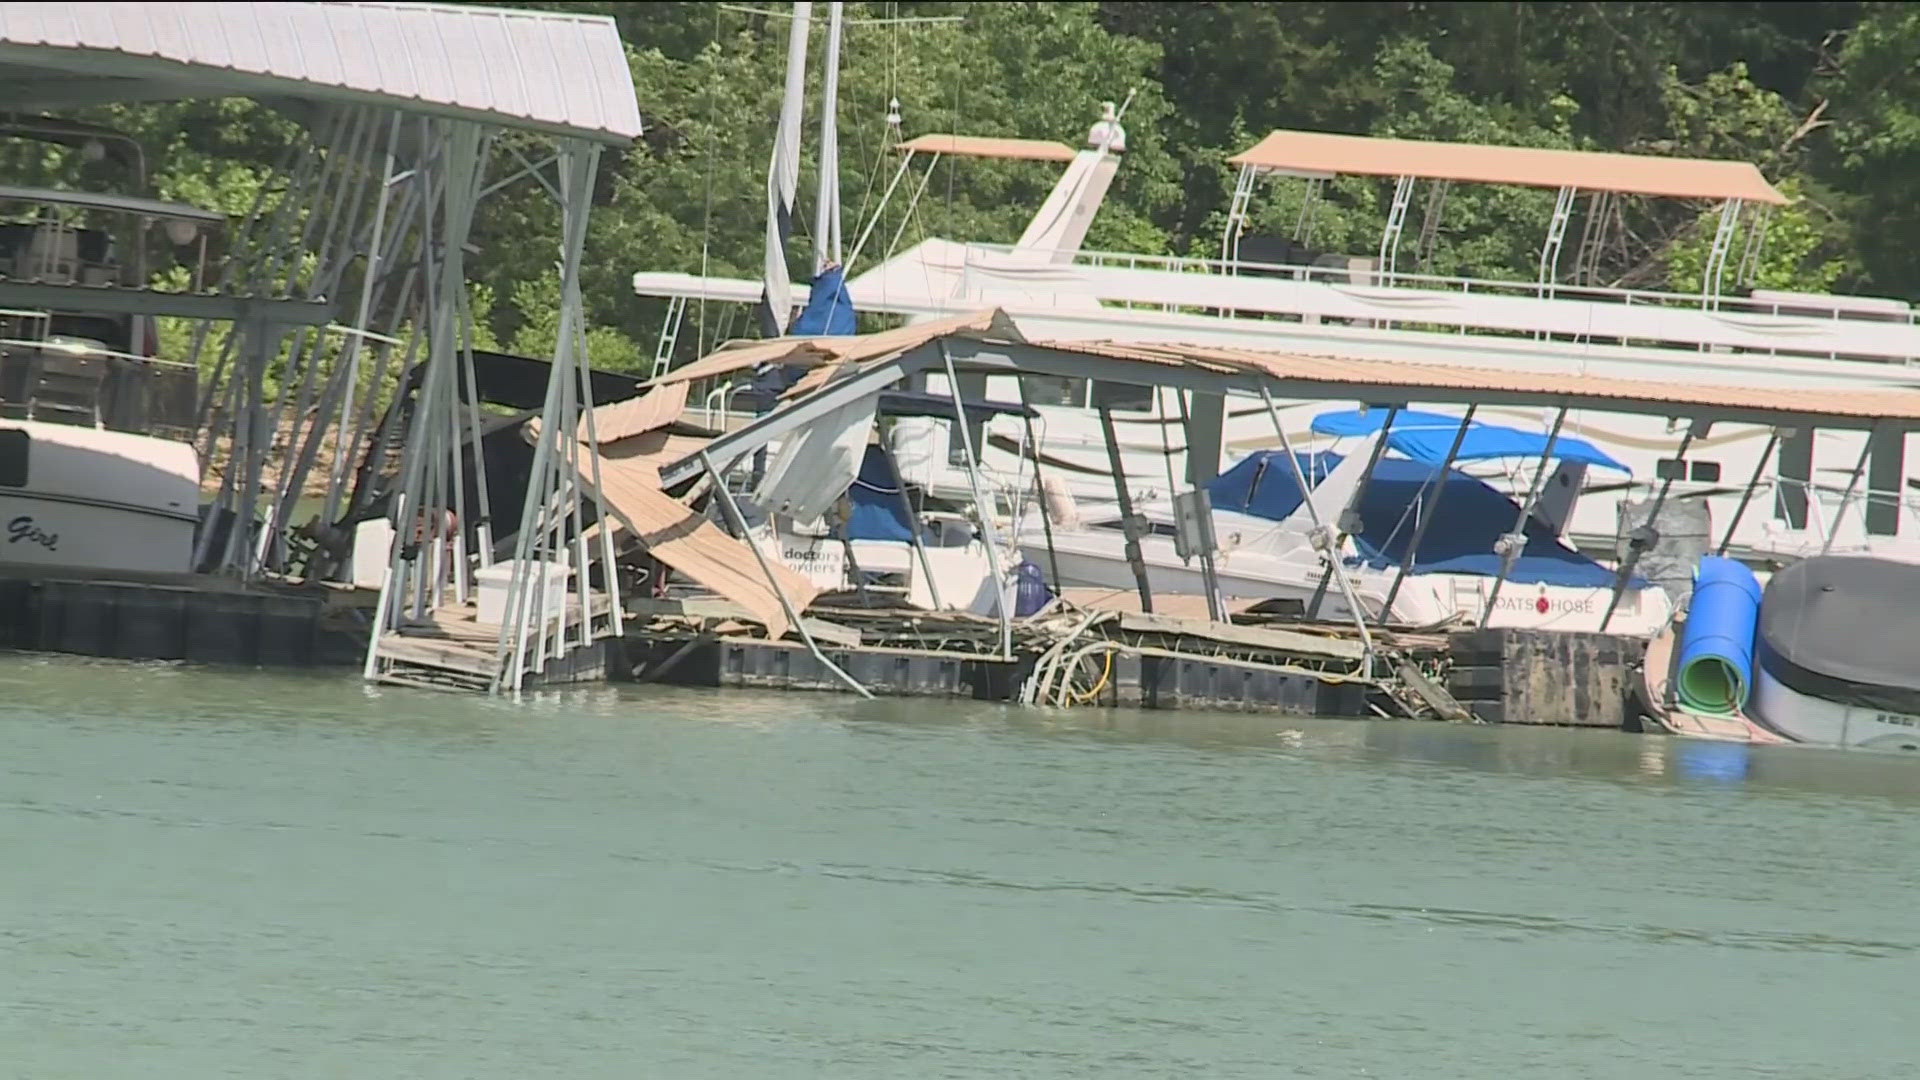 "We're up to 10 boats at the bottom of the lake right now and still counting," Rocky Branch Marina's Sales Manager Davis Hogue said.